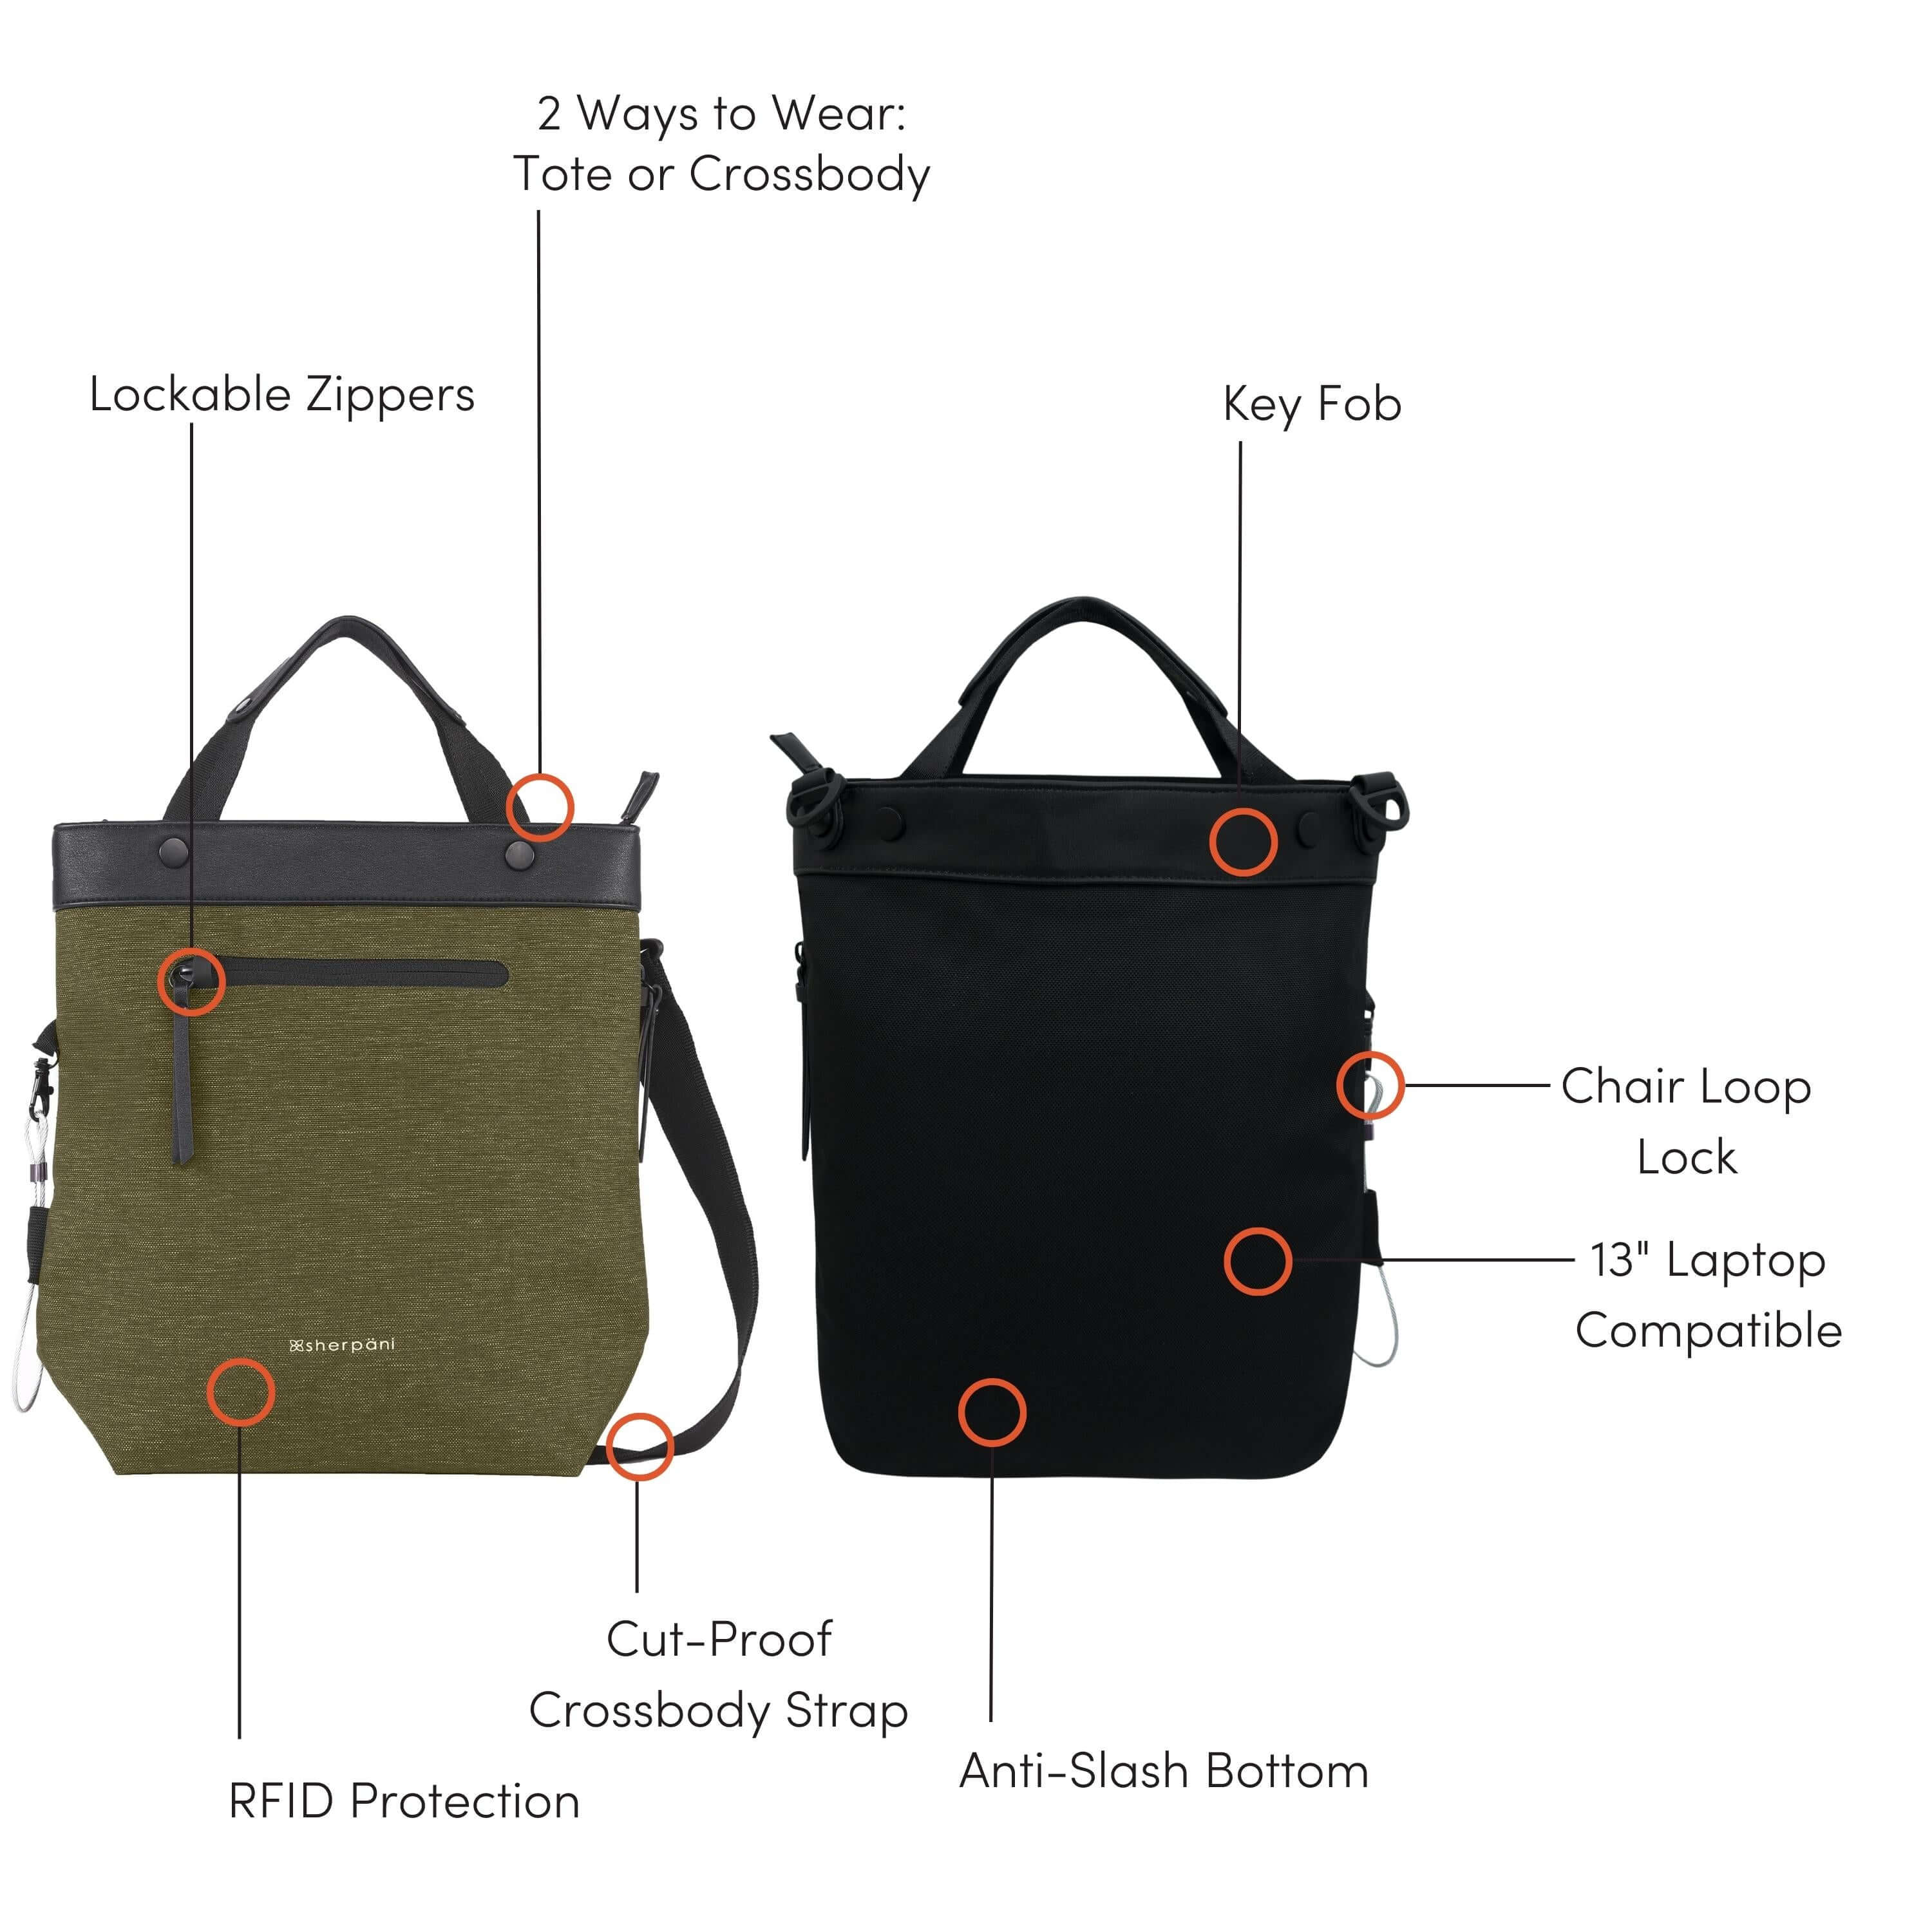 Graphic showcasing the features of Sherpani’s Anti Theft bag, the Soleil AT in Loden. There is a front and a back view of the bag, red circles highlight the following features: Lockable Zippers, 2 Ways to Wear: Tote or Crossbody, Key Fob, Chair Loop Lock, 13” Laptop Compatible, Anti-Slash Bottom, Cut-Proof Crossbody Strap, RFID Protection. 